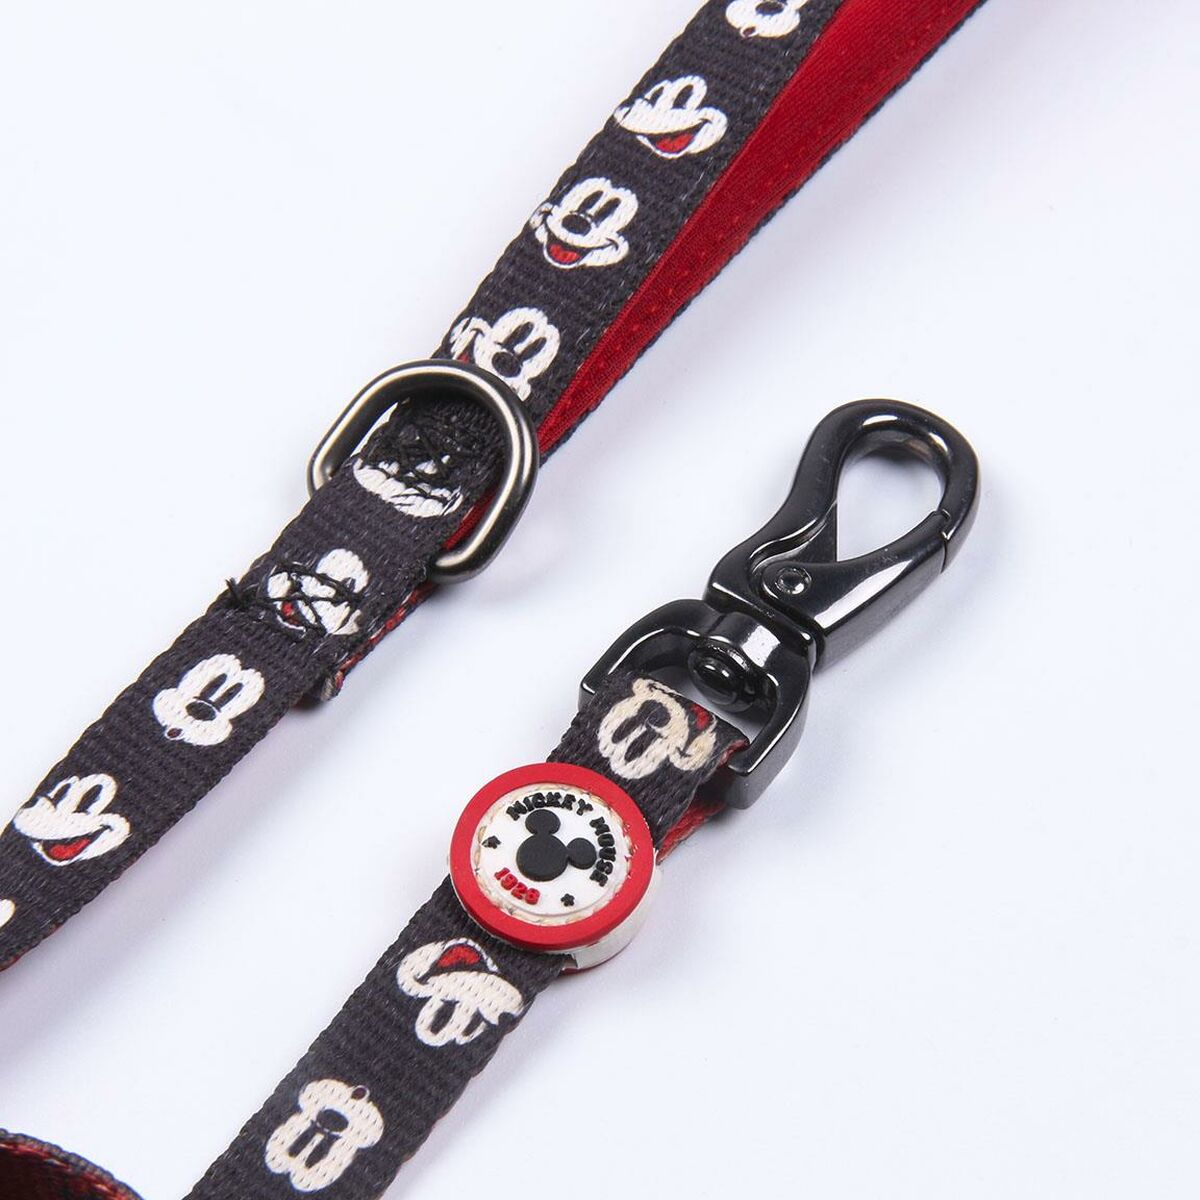 Dog Lead Mickey Mouse Black S